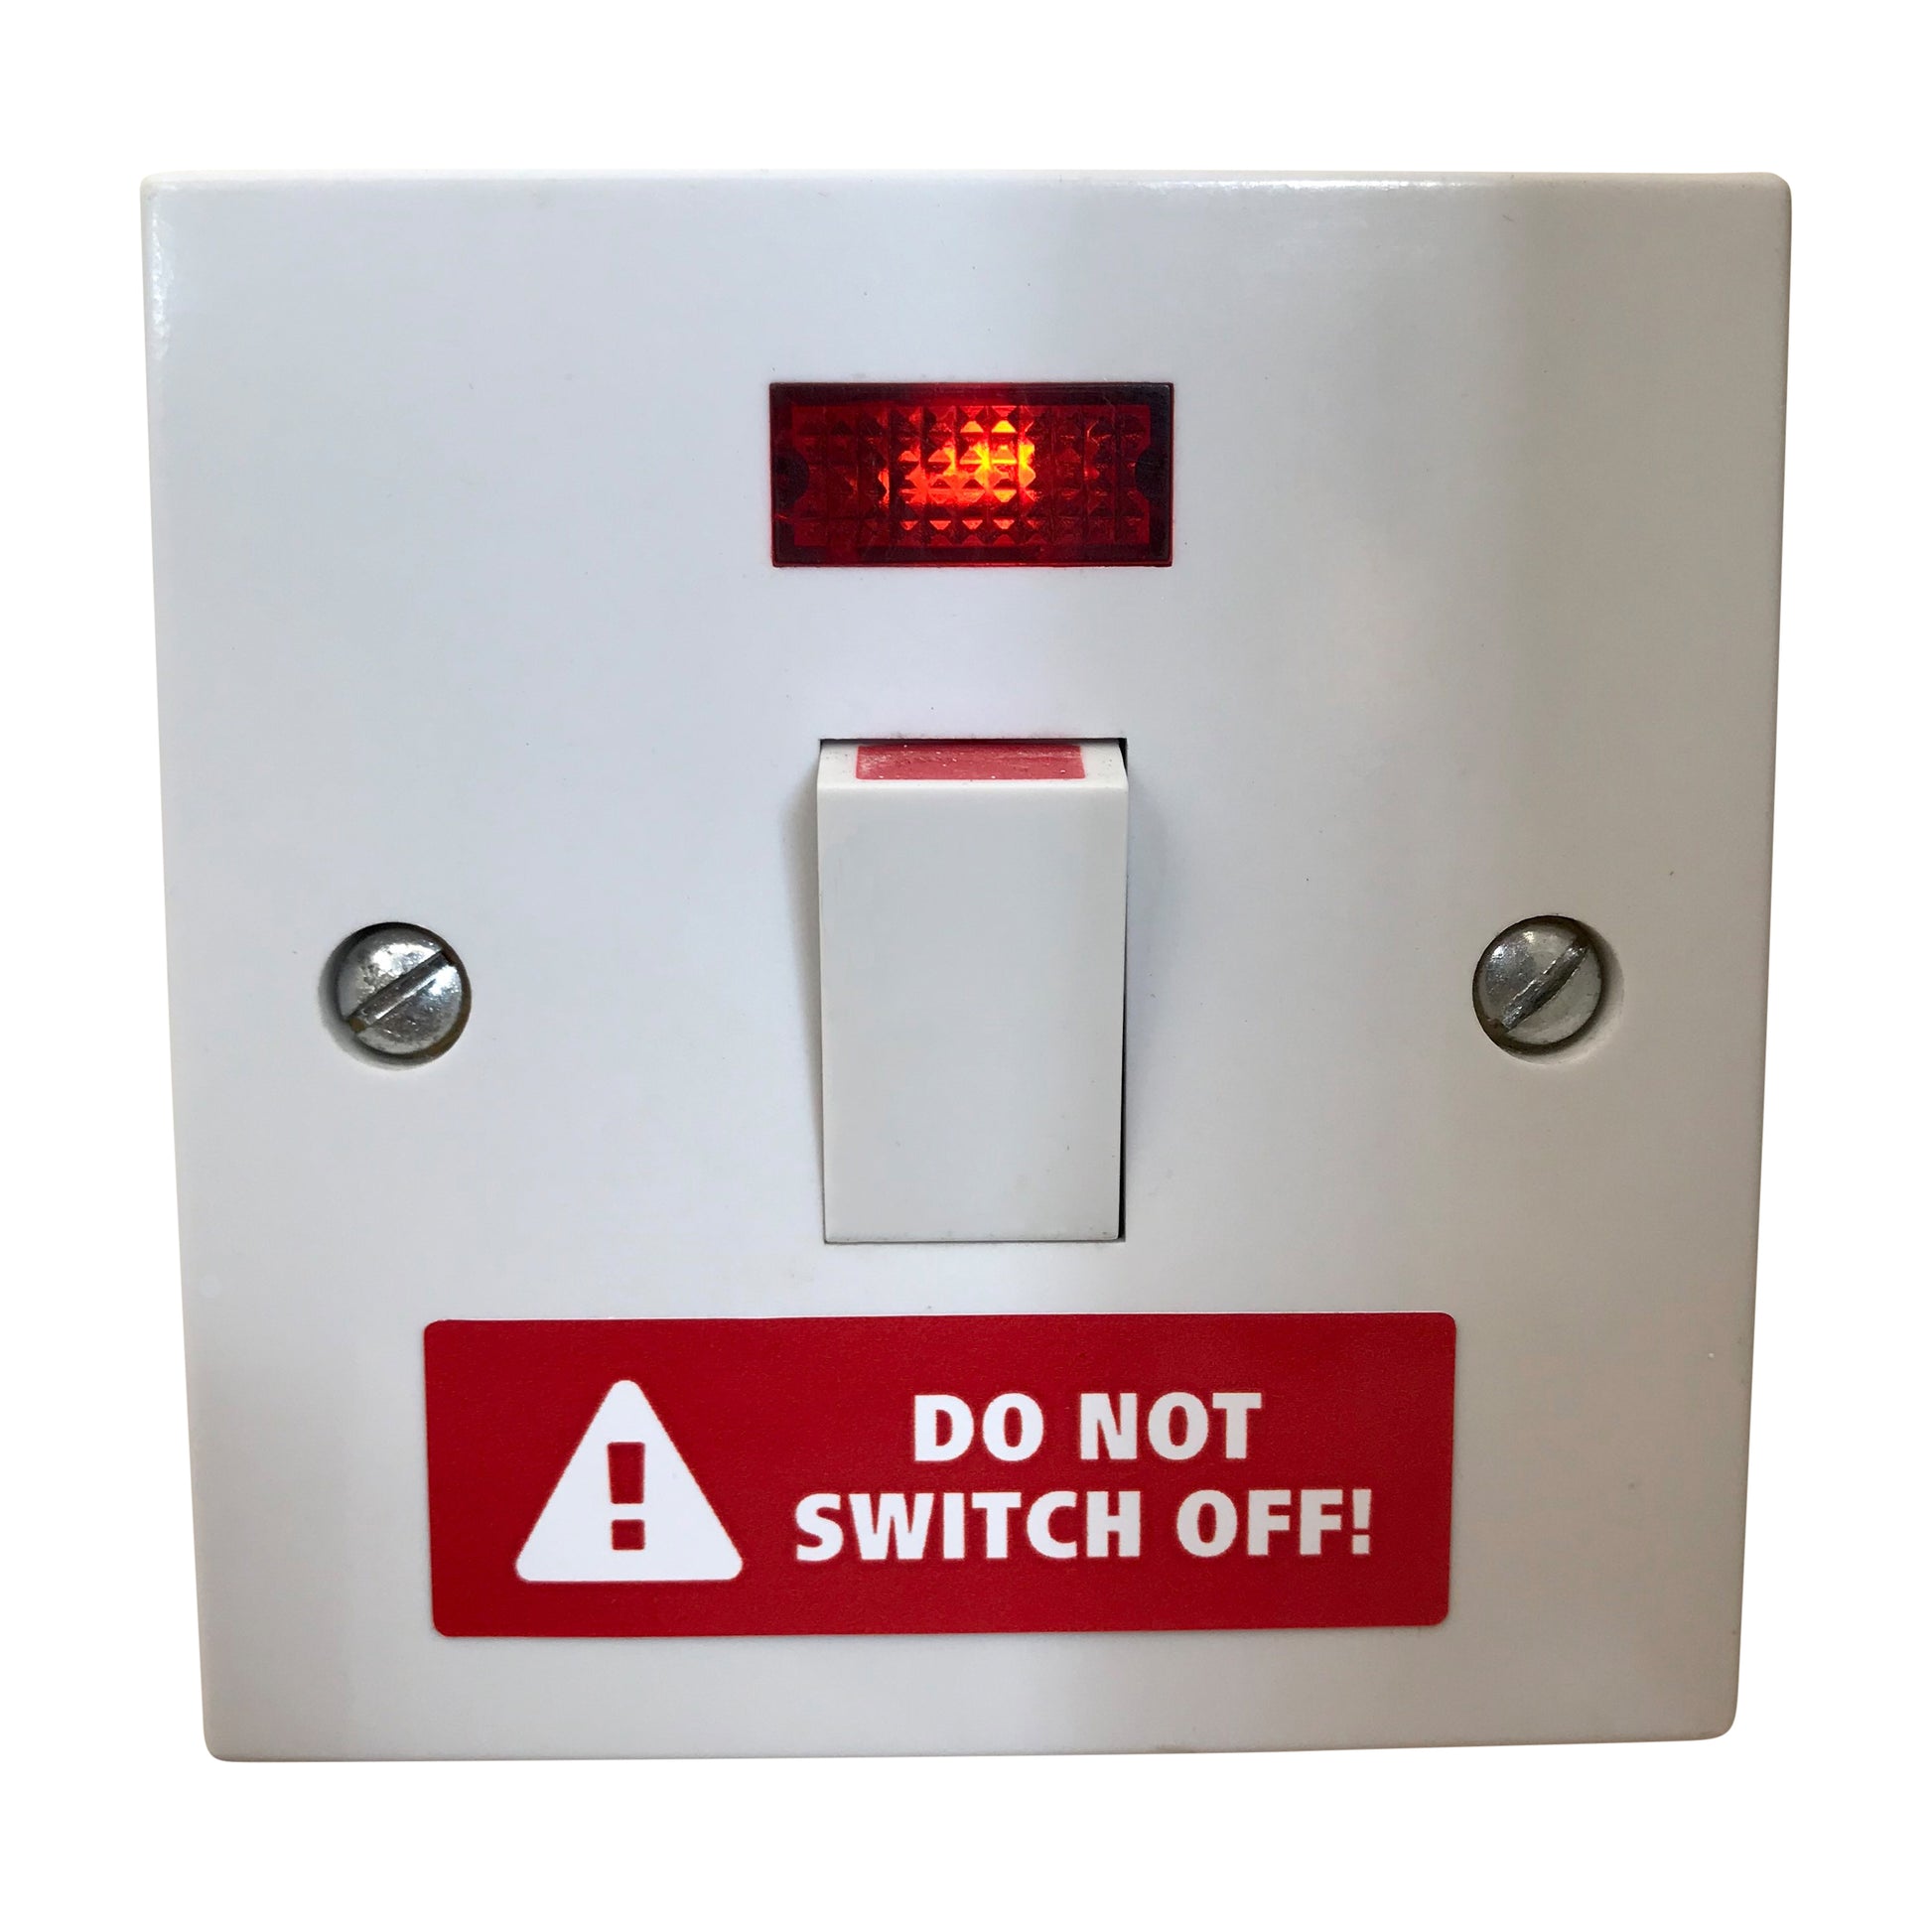 Do Not Switch Off Sticker by Gobrecht & Ulrich on Switch Sample Photo